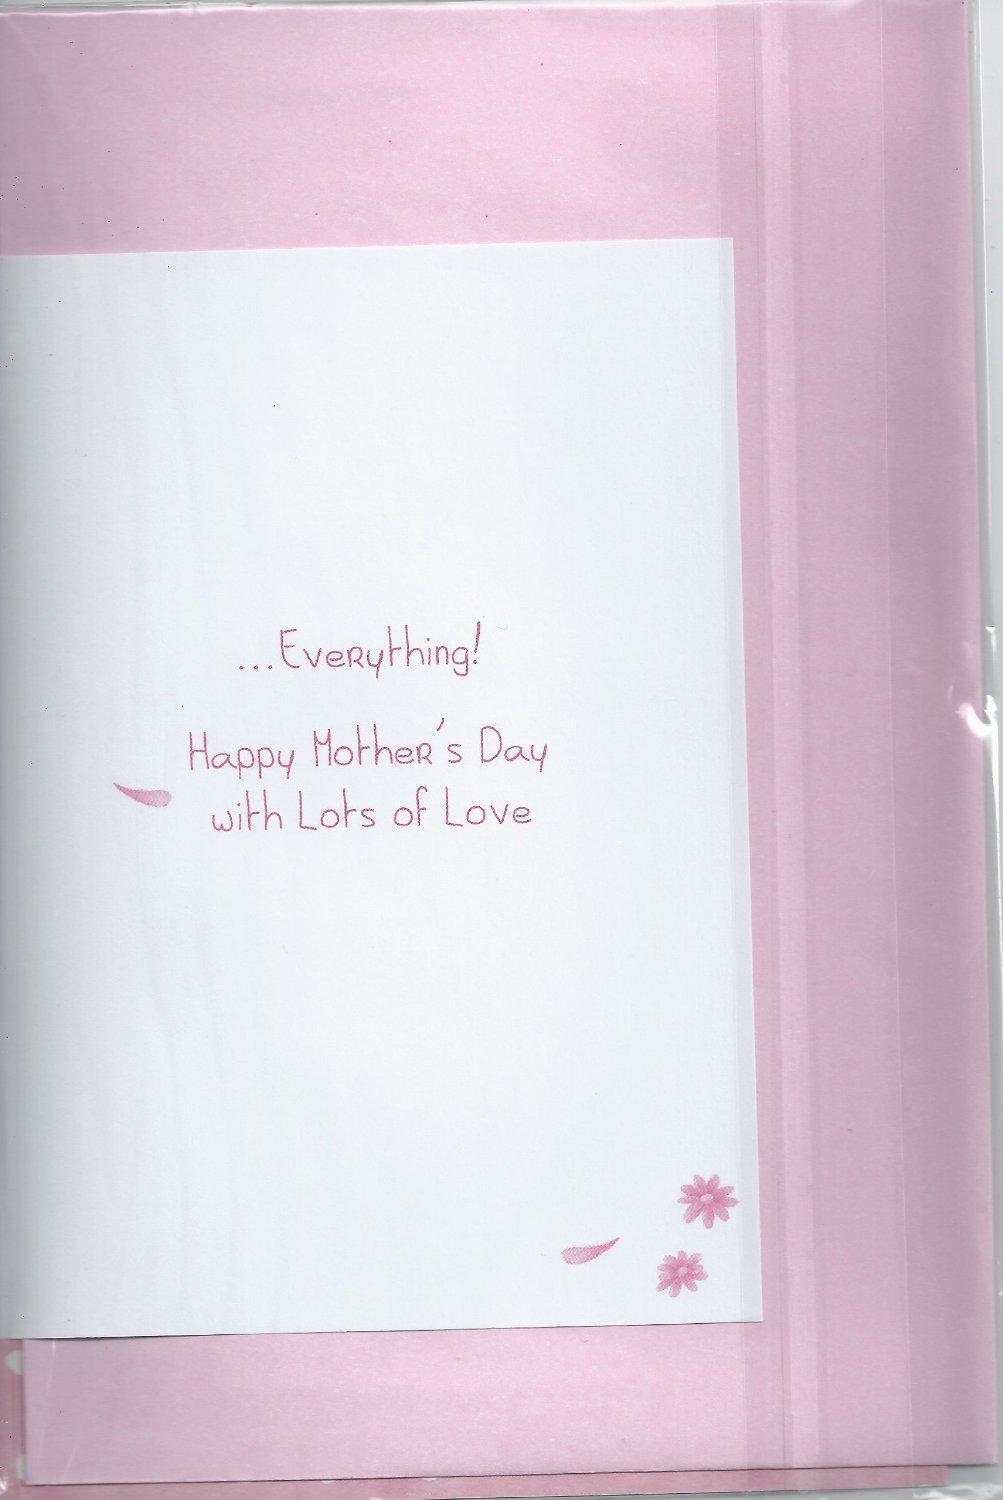 For a special Mummy Adorable Bears Lovely Happy Mother's Day Card